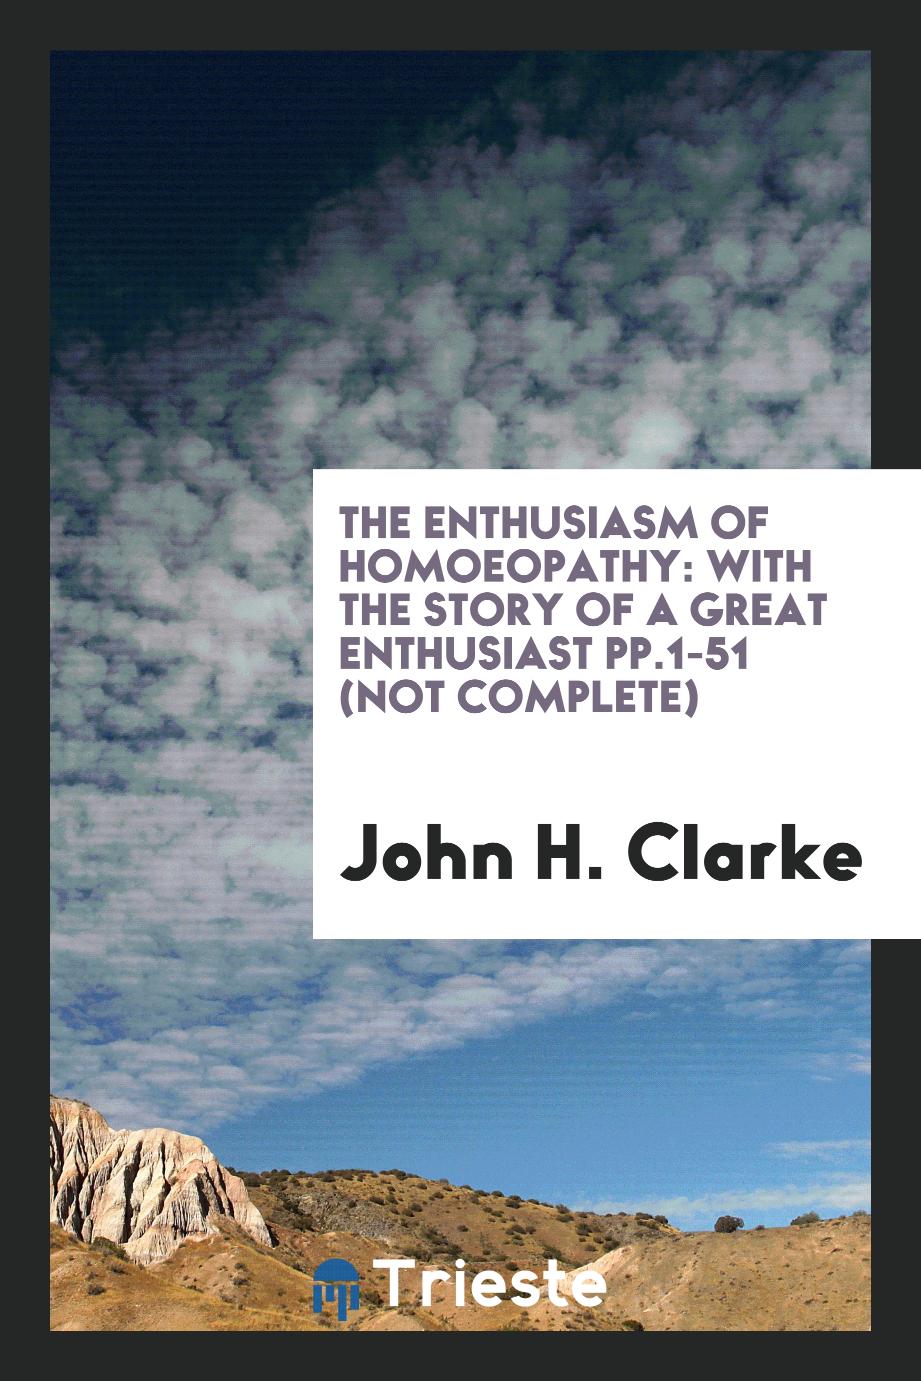 The Enthusiasm of Homoeopathy: With the Story of a Great Enthusiast pp.1-51 (not complete)